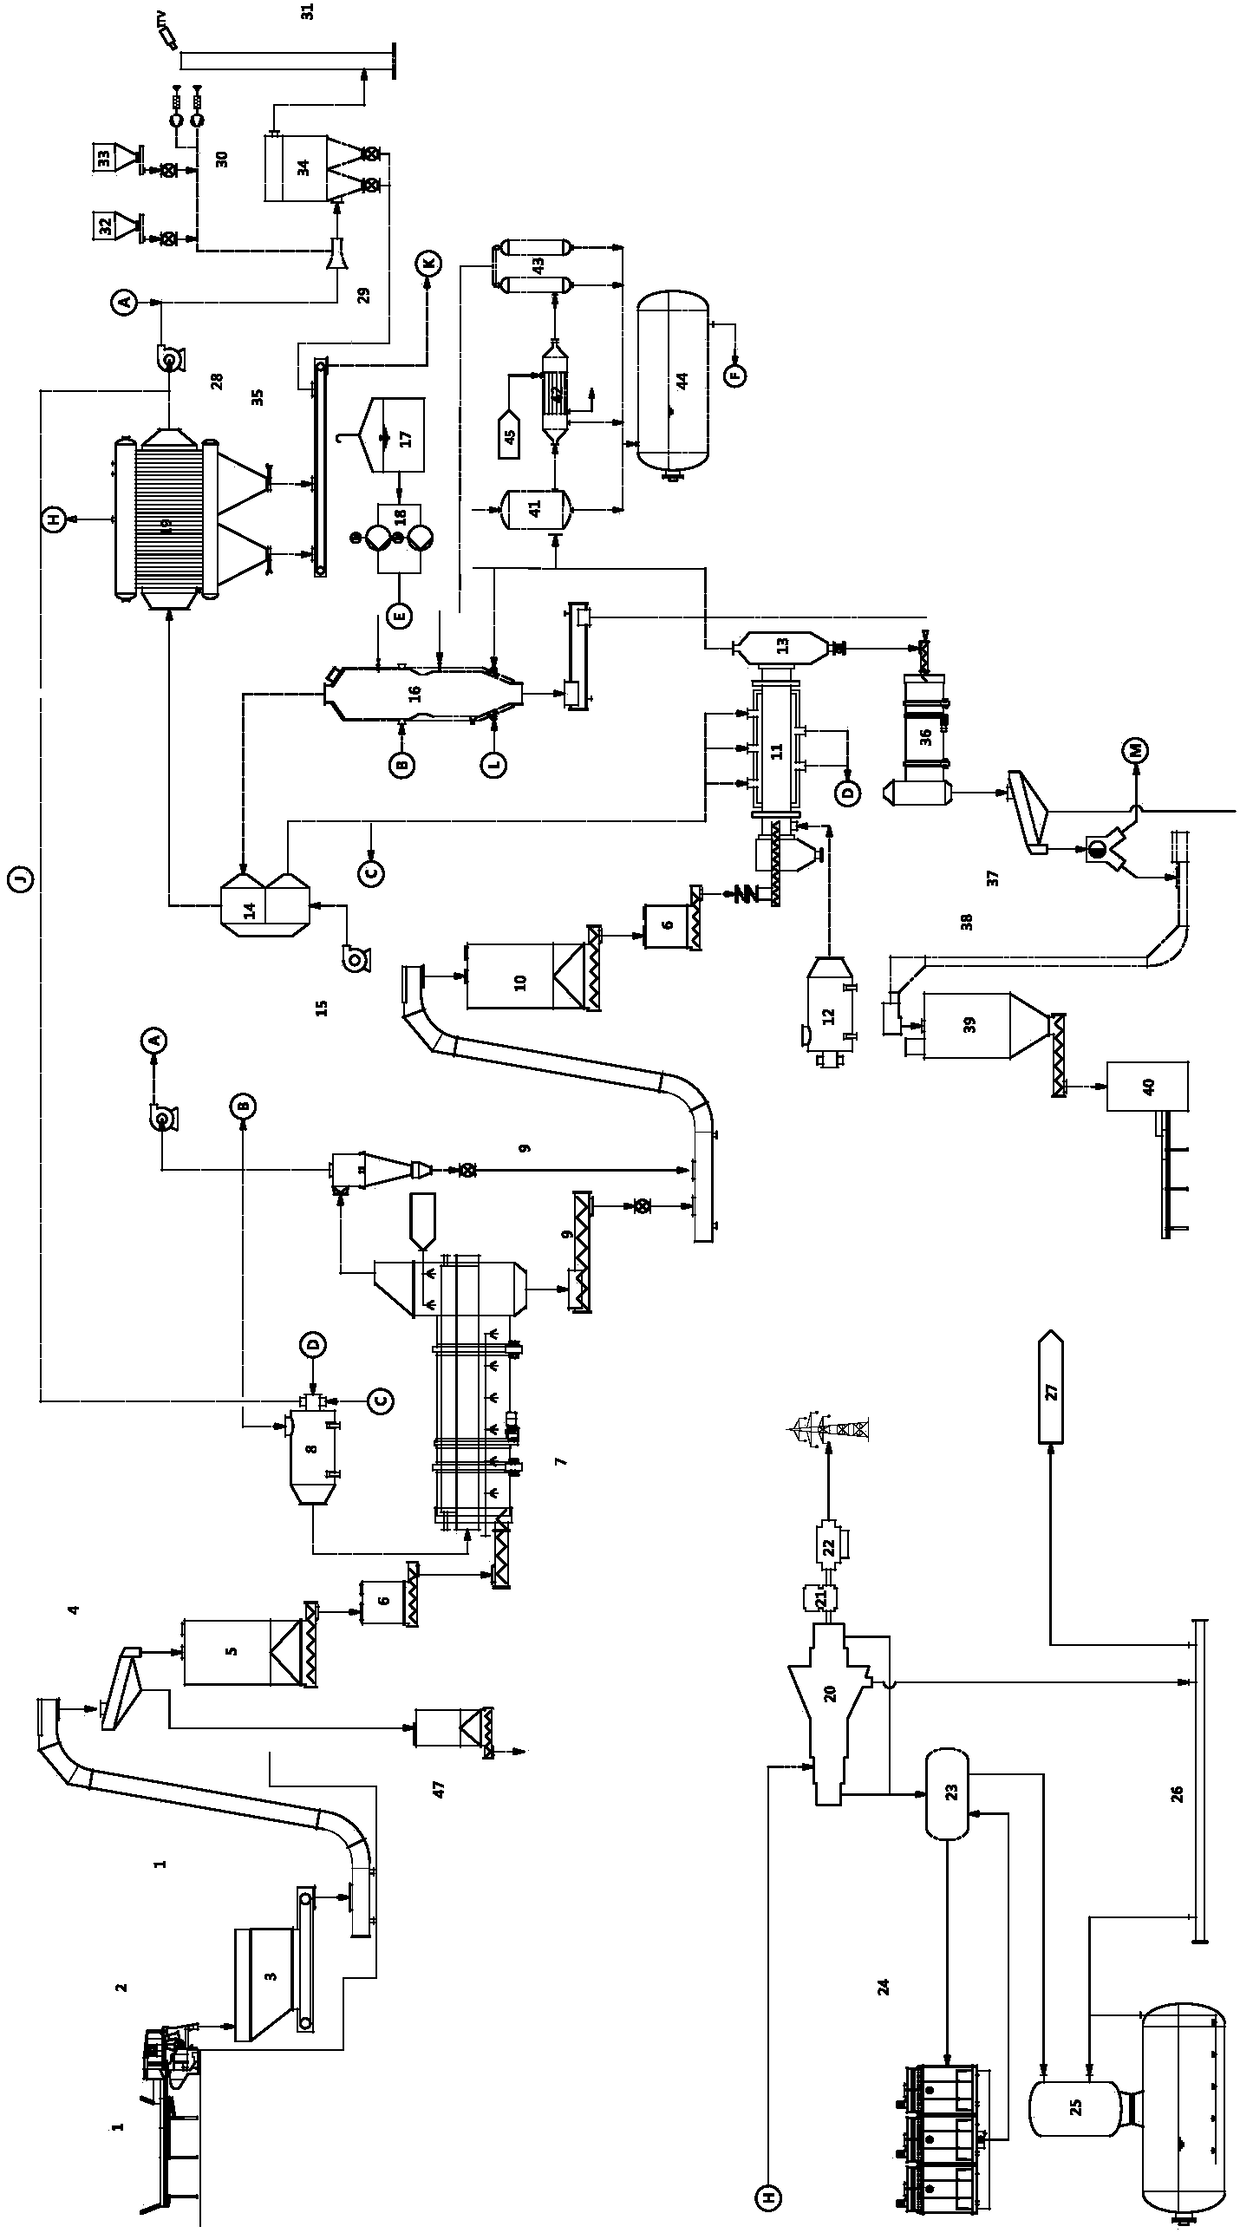 Pyrolyzation, gasification and carbonization device for producing reclaimed oil by utilizing waste